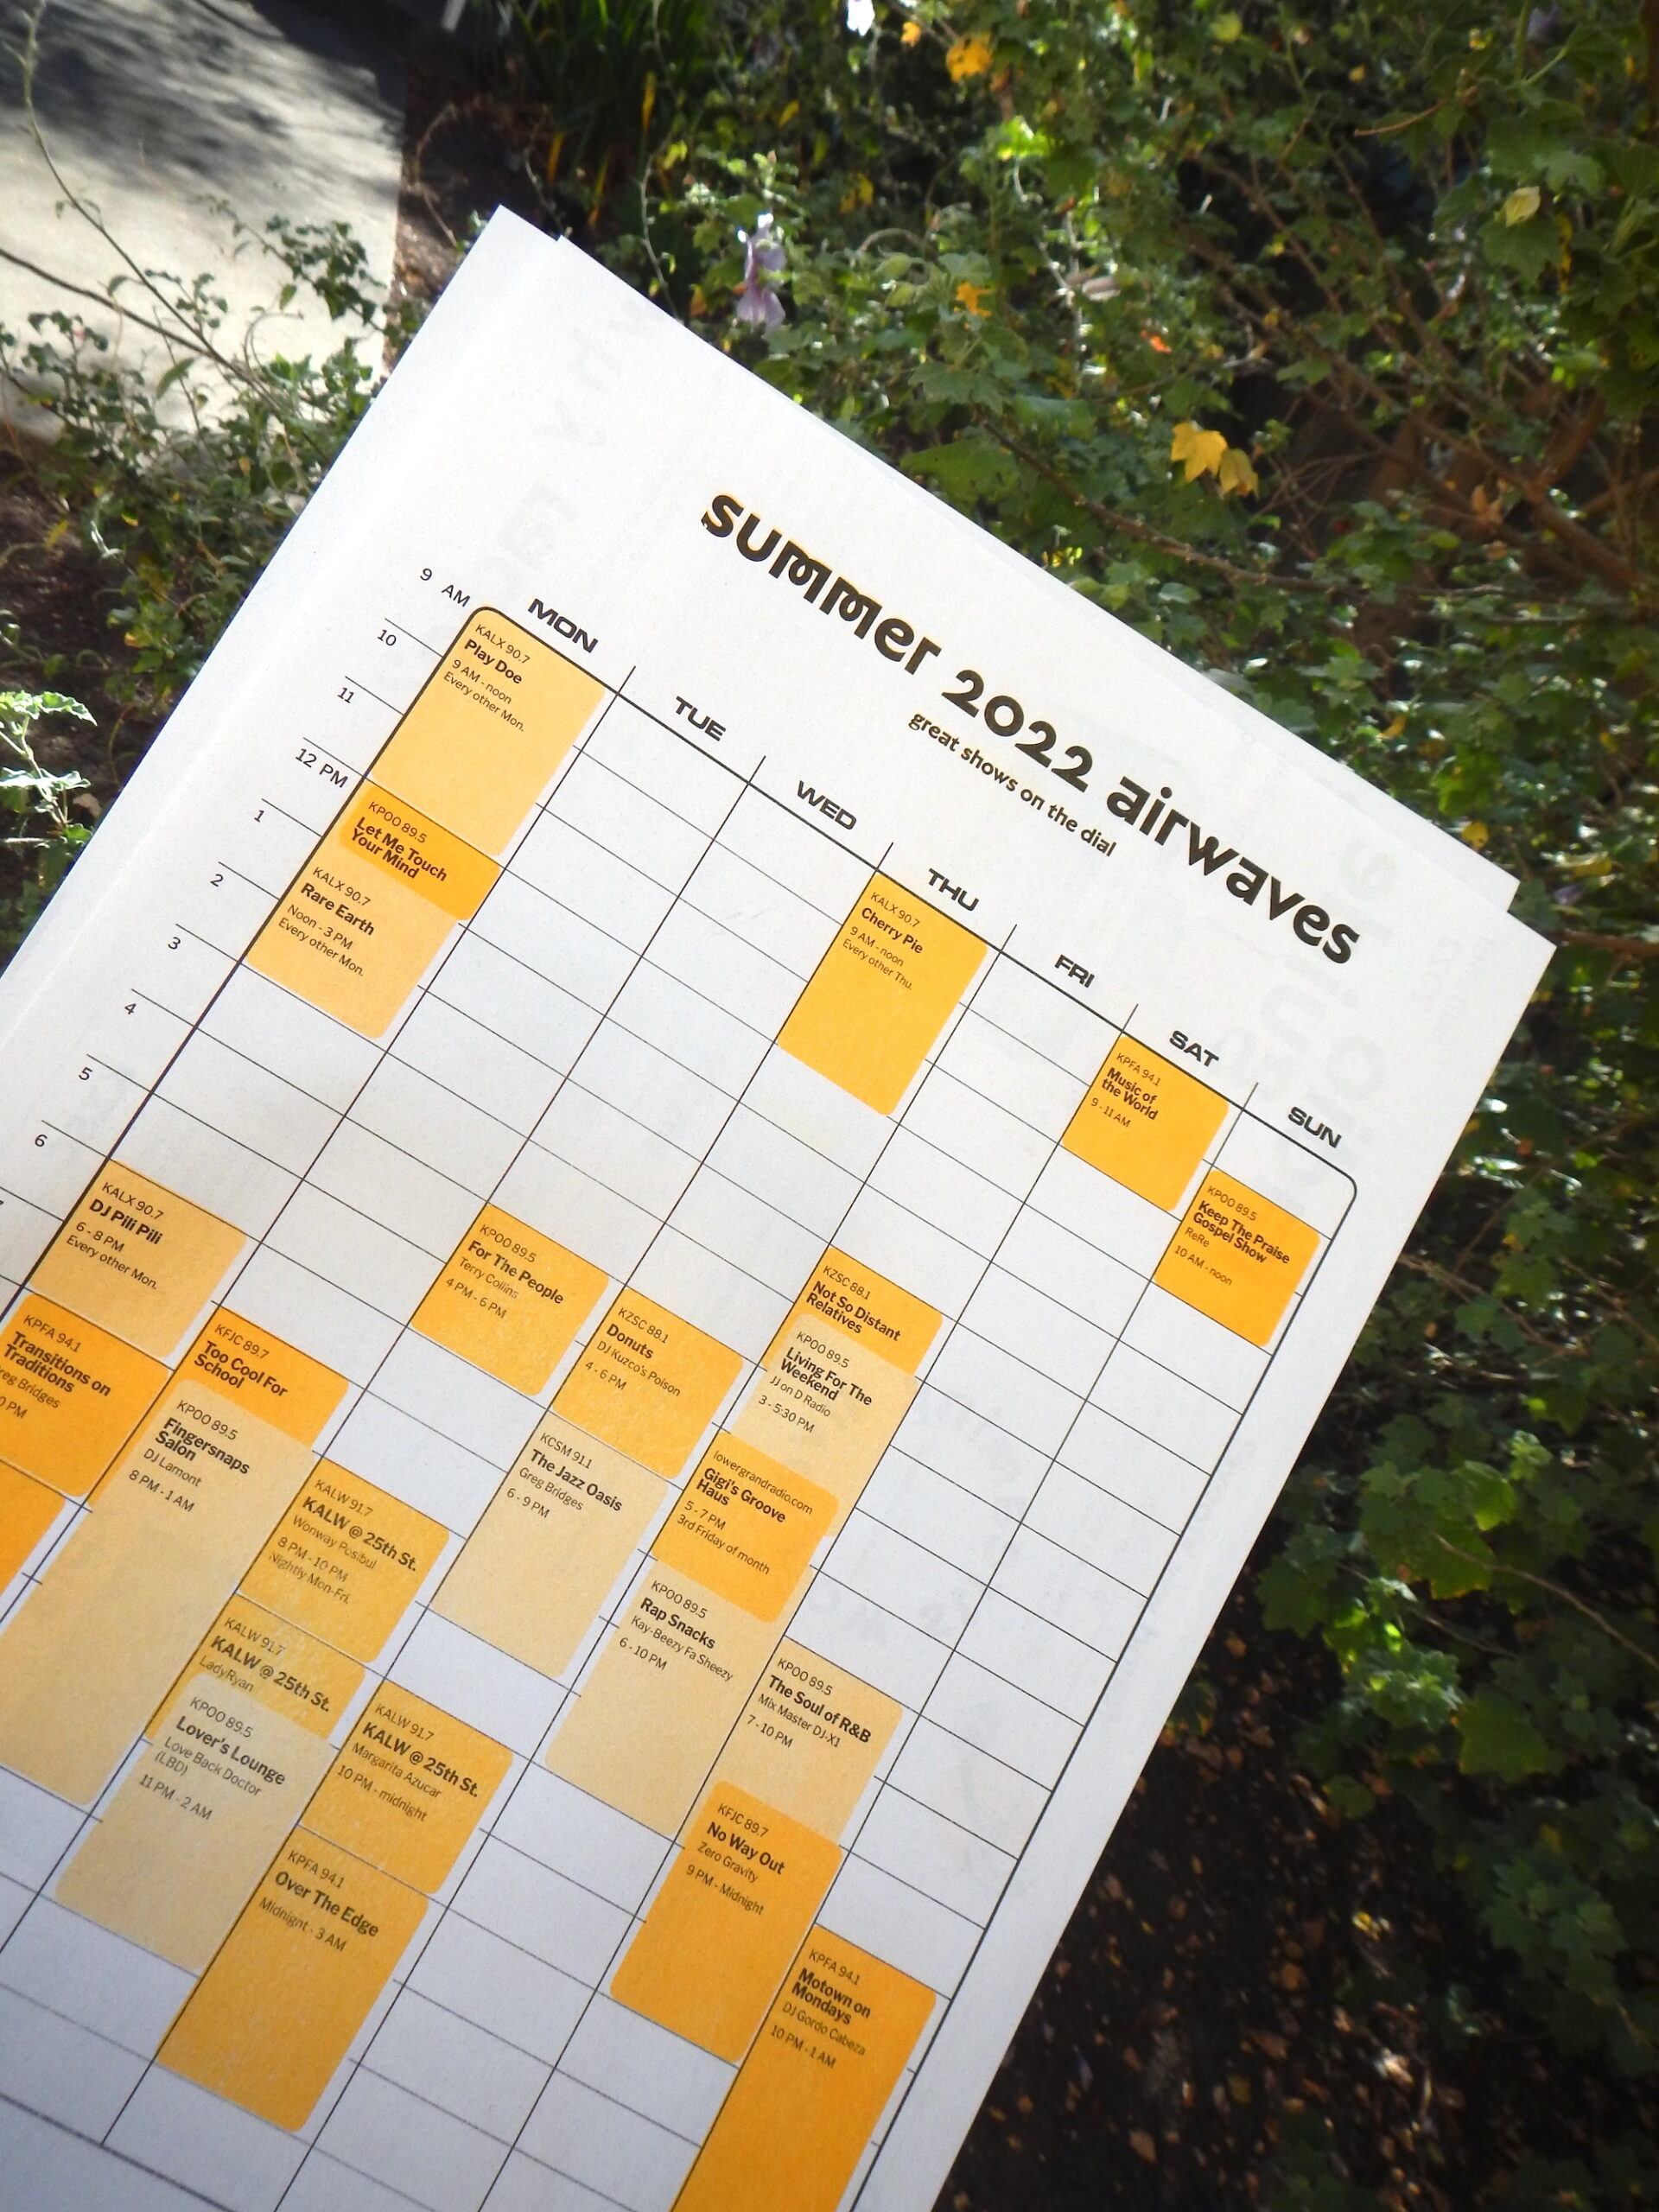 Printed schedule of radio shows in black and sunflower